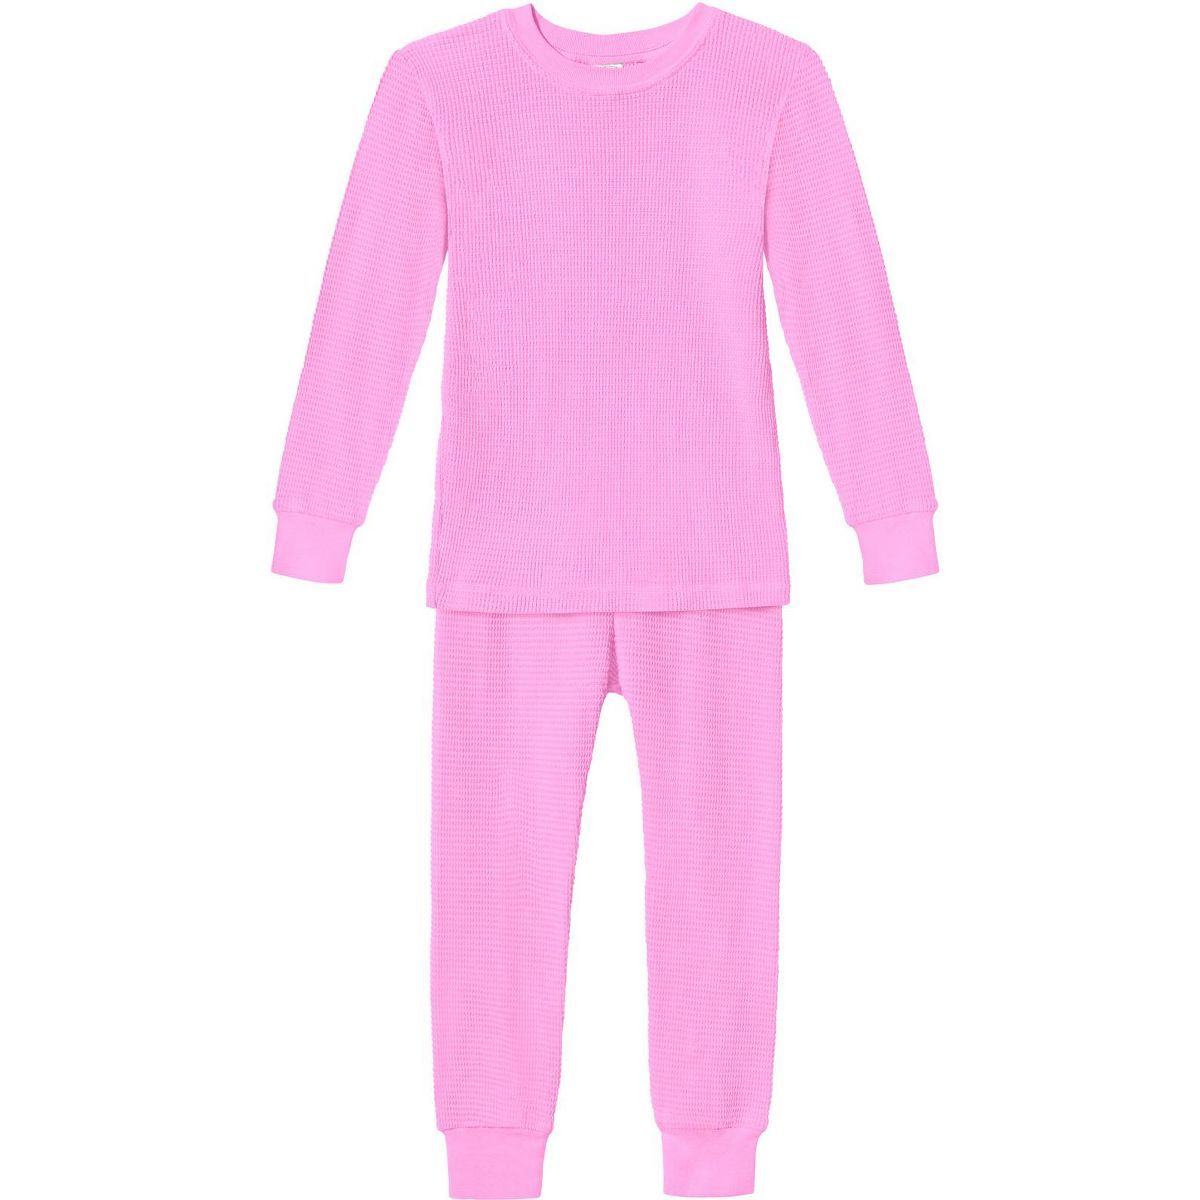 City Threads USA-Made Cotton Thermal Long John Set - Heavier Weight for Boys and Girls | Target